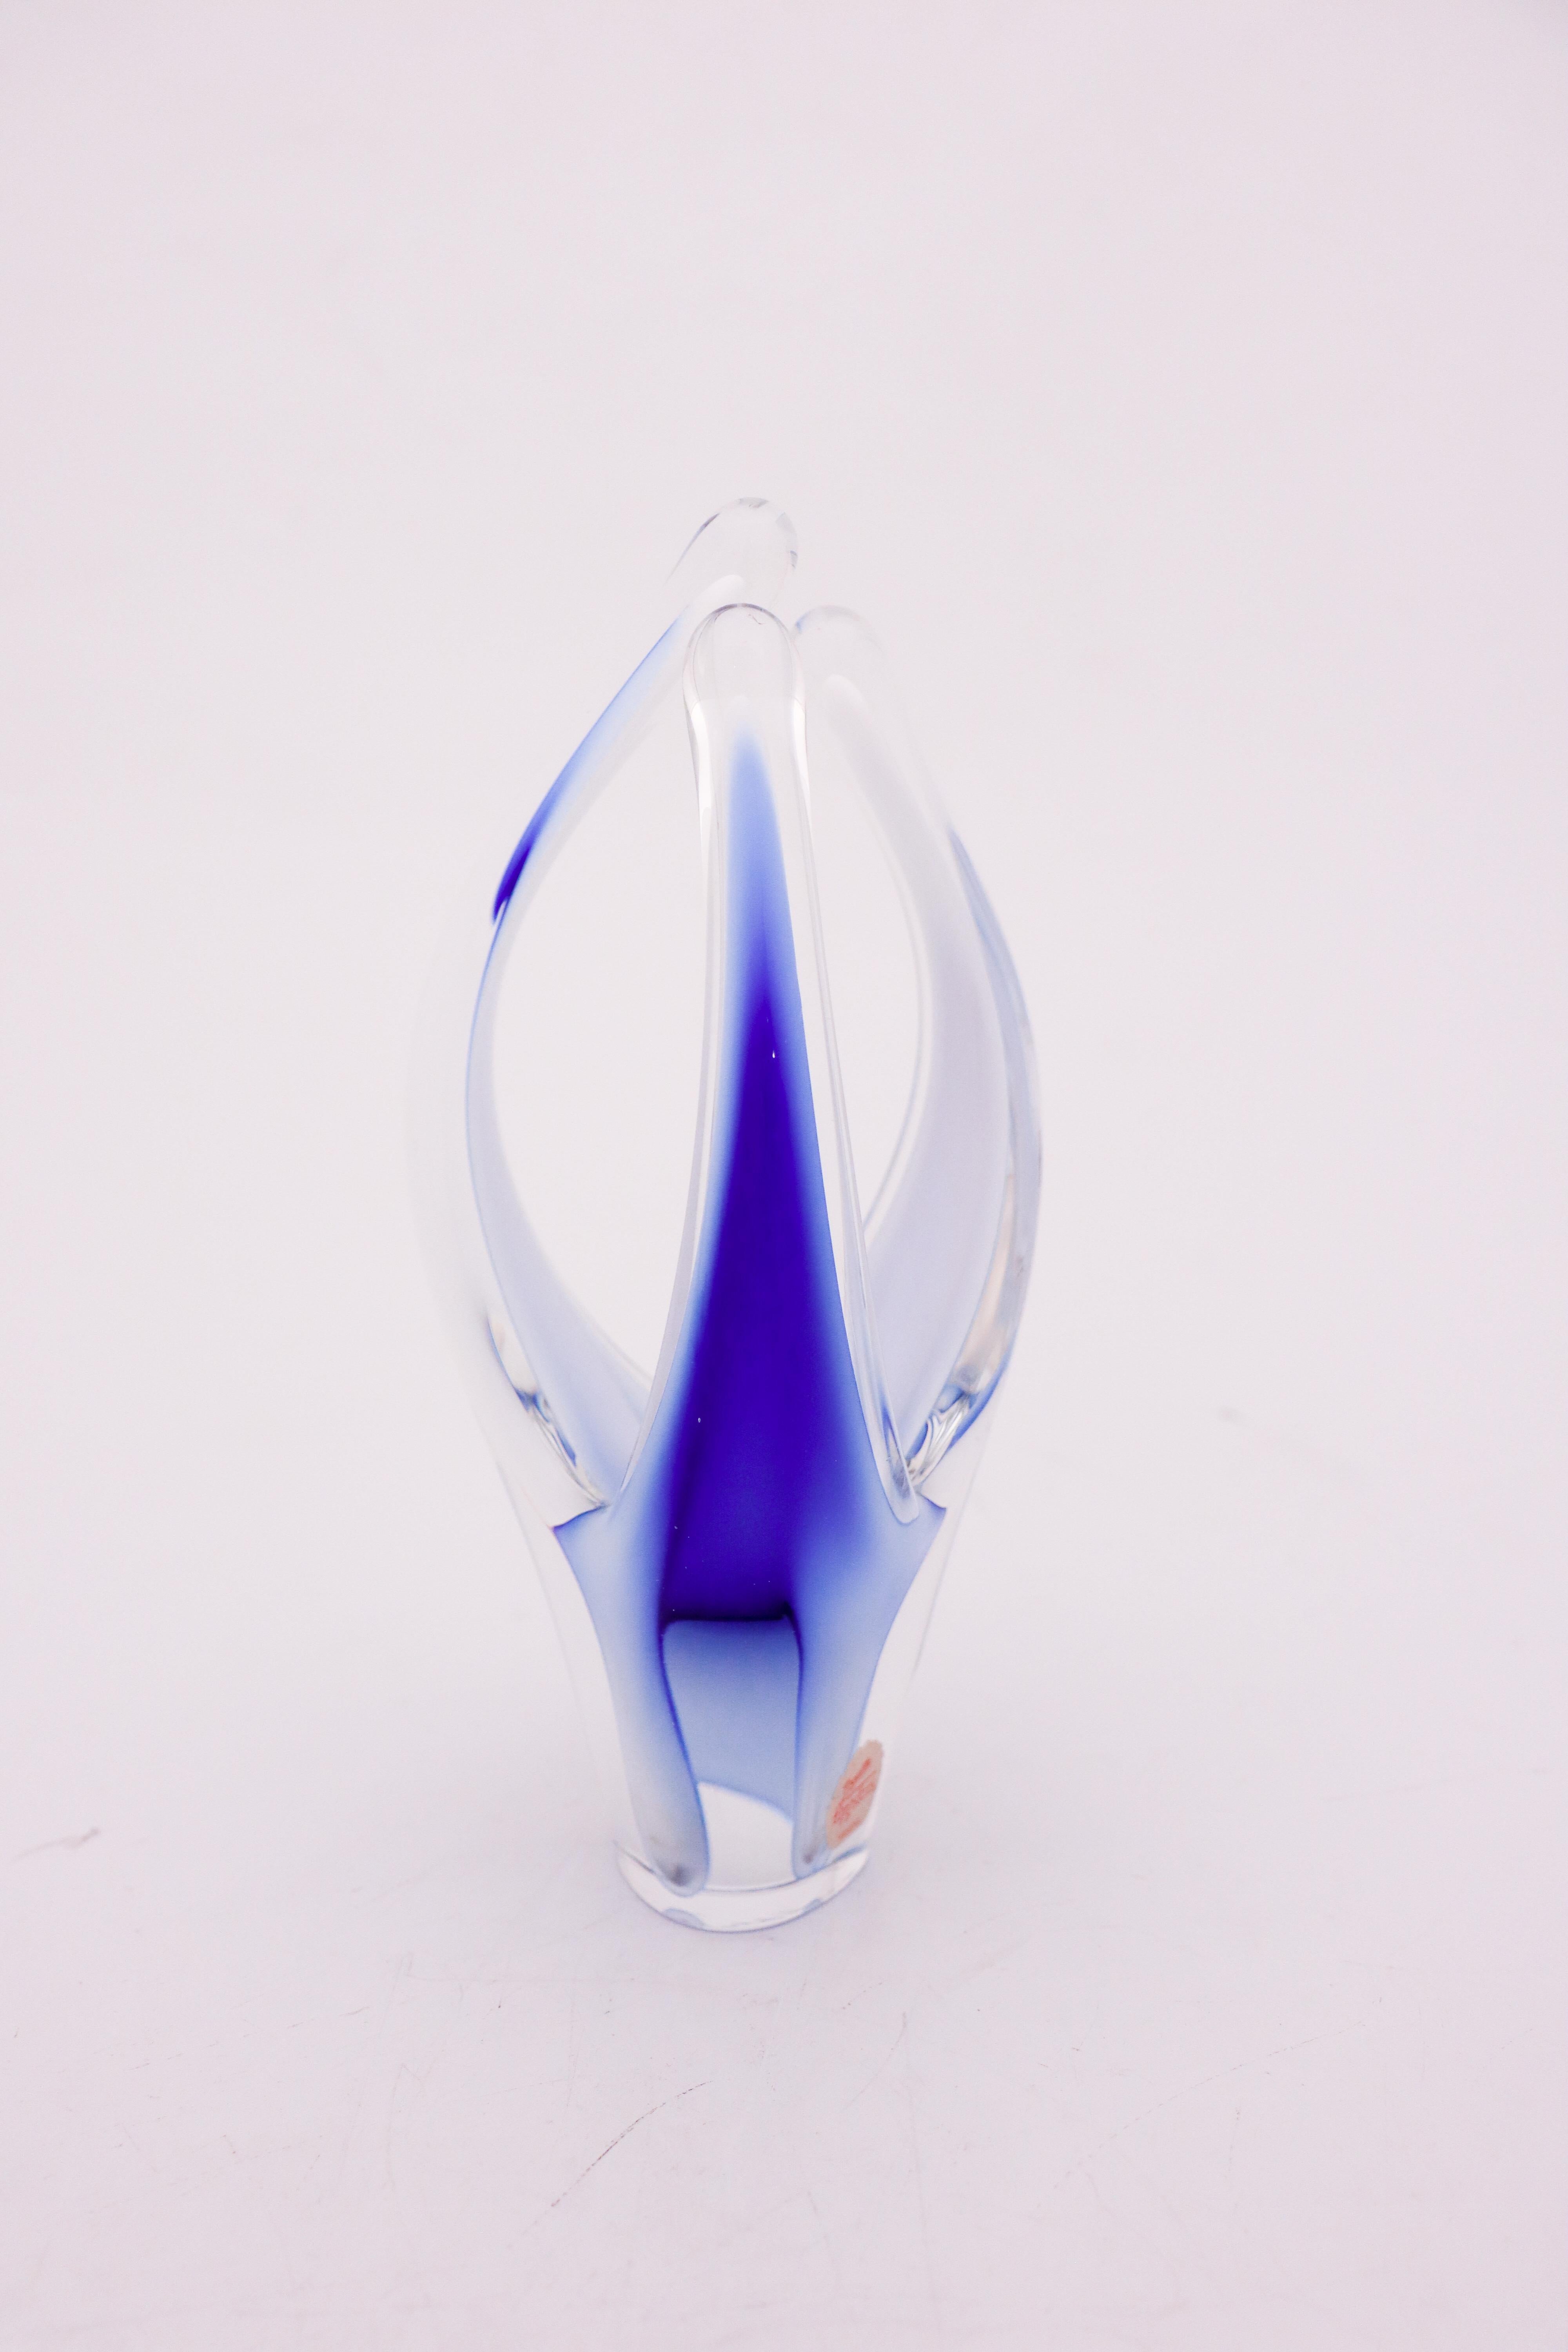 A lovely glass sculpture / vase of model Coquille designed by Paul Kedelv at Flygsfors glassworks in Sweden in 1960. It is 21 cm (8.4